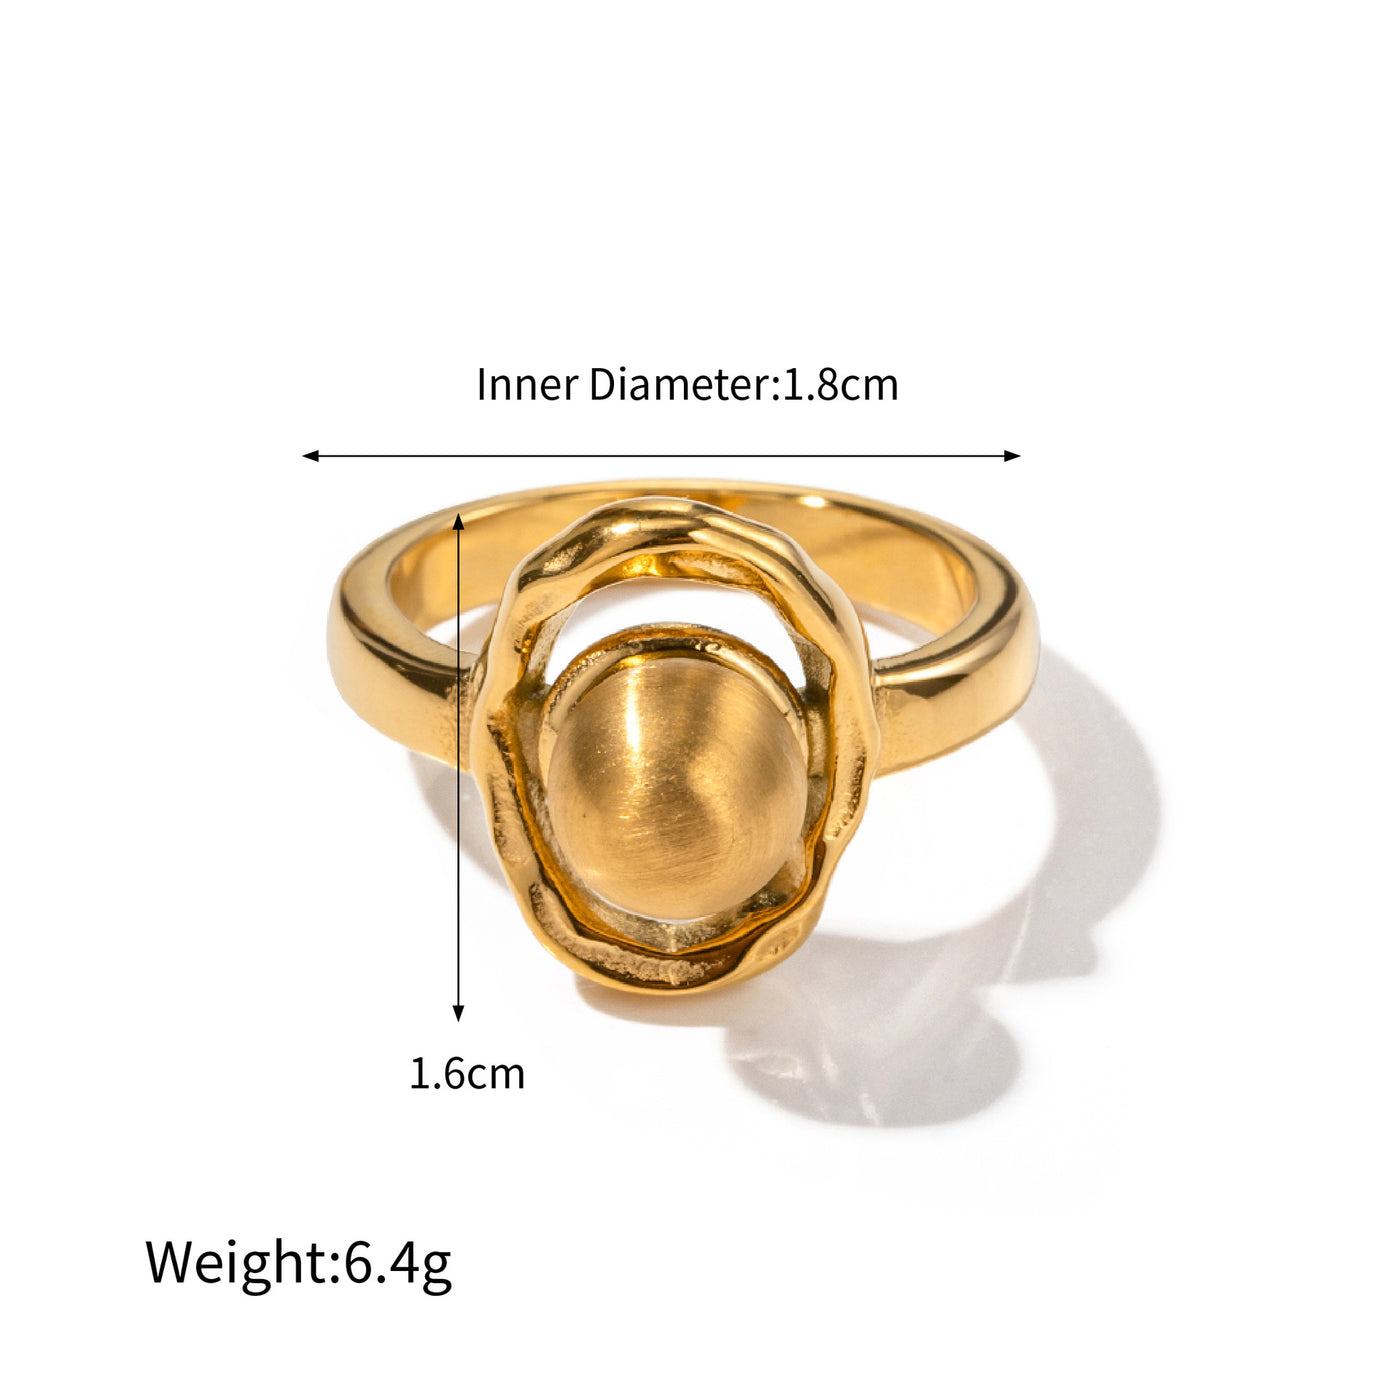 18K gold noble and elegant versatile ring inlaid with pearls - Syble's